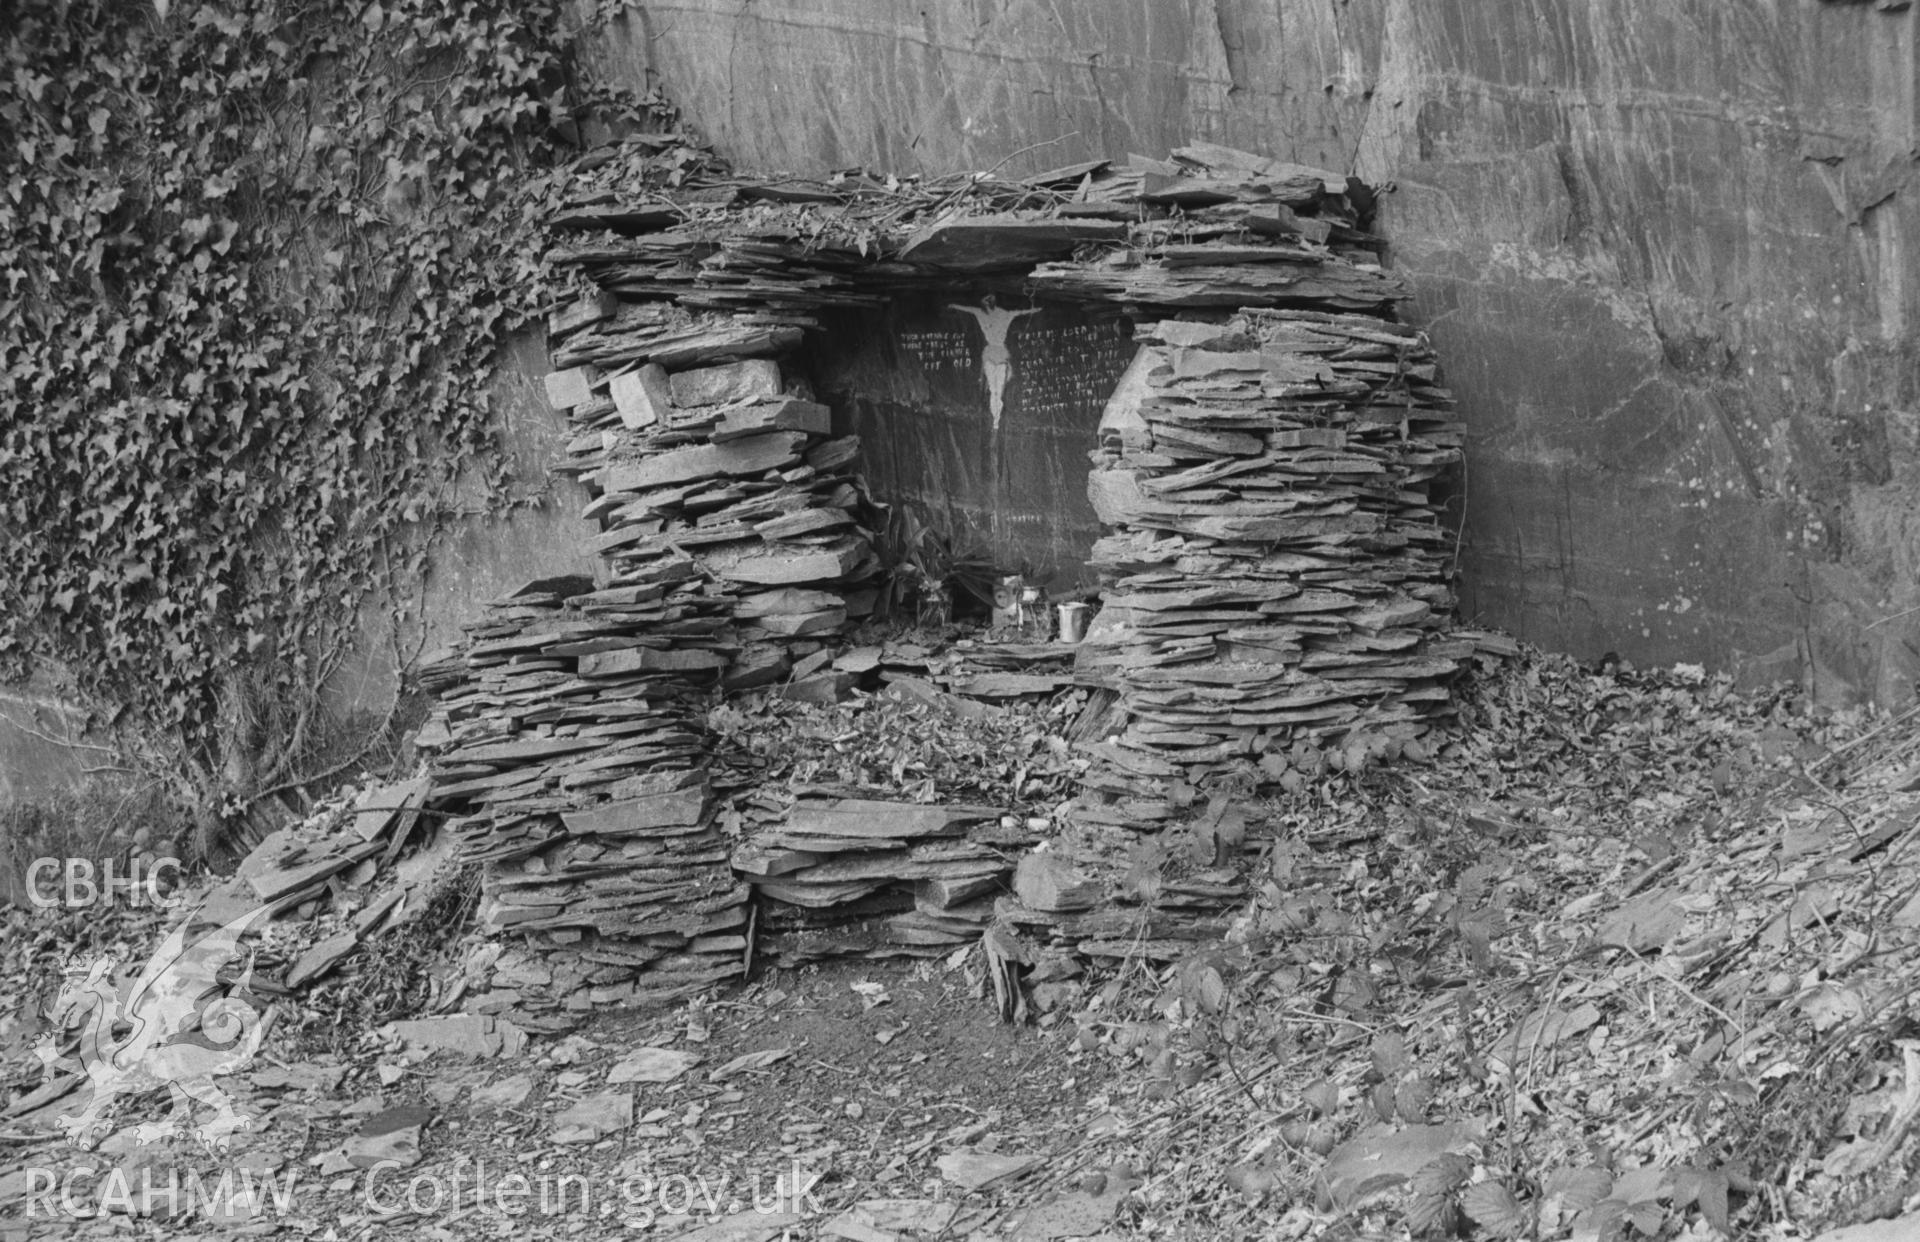 Digital copy of a black and white negative showing shrine to 'Paddy Duffy' Machynlleth. Exact location unknown. Photographed in April 1964 by Arthur O. Chater.